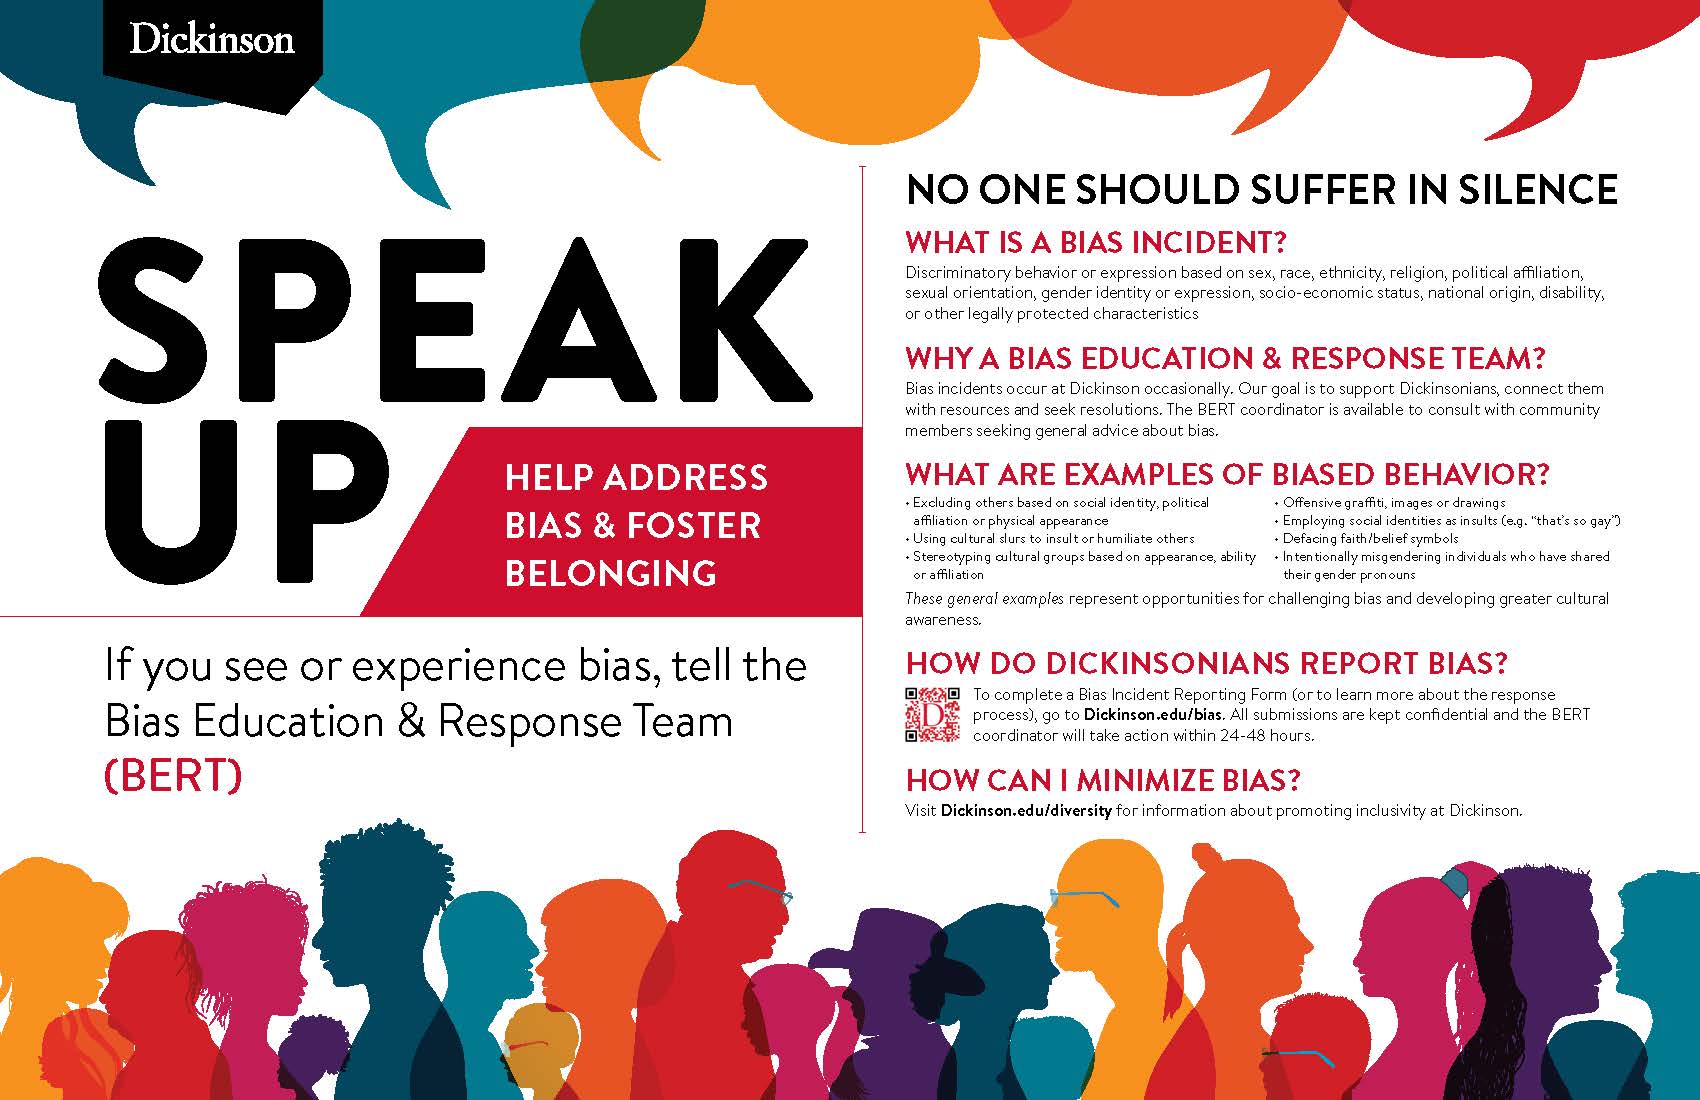 Poster encouraging Dickinsonians to speak up if they see or experience bias